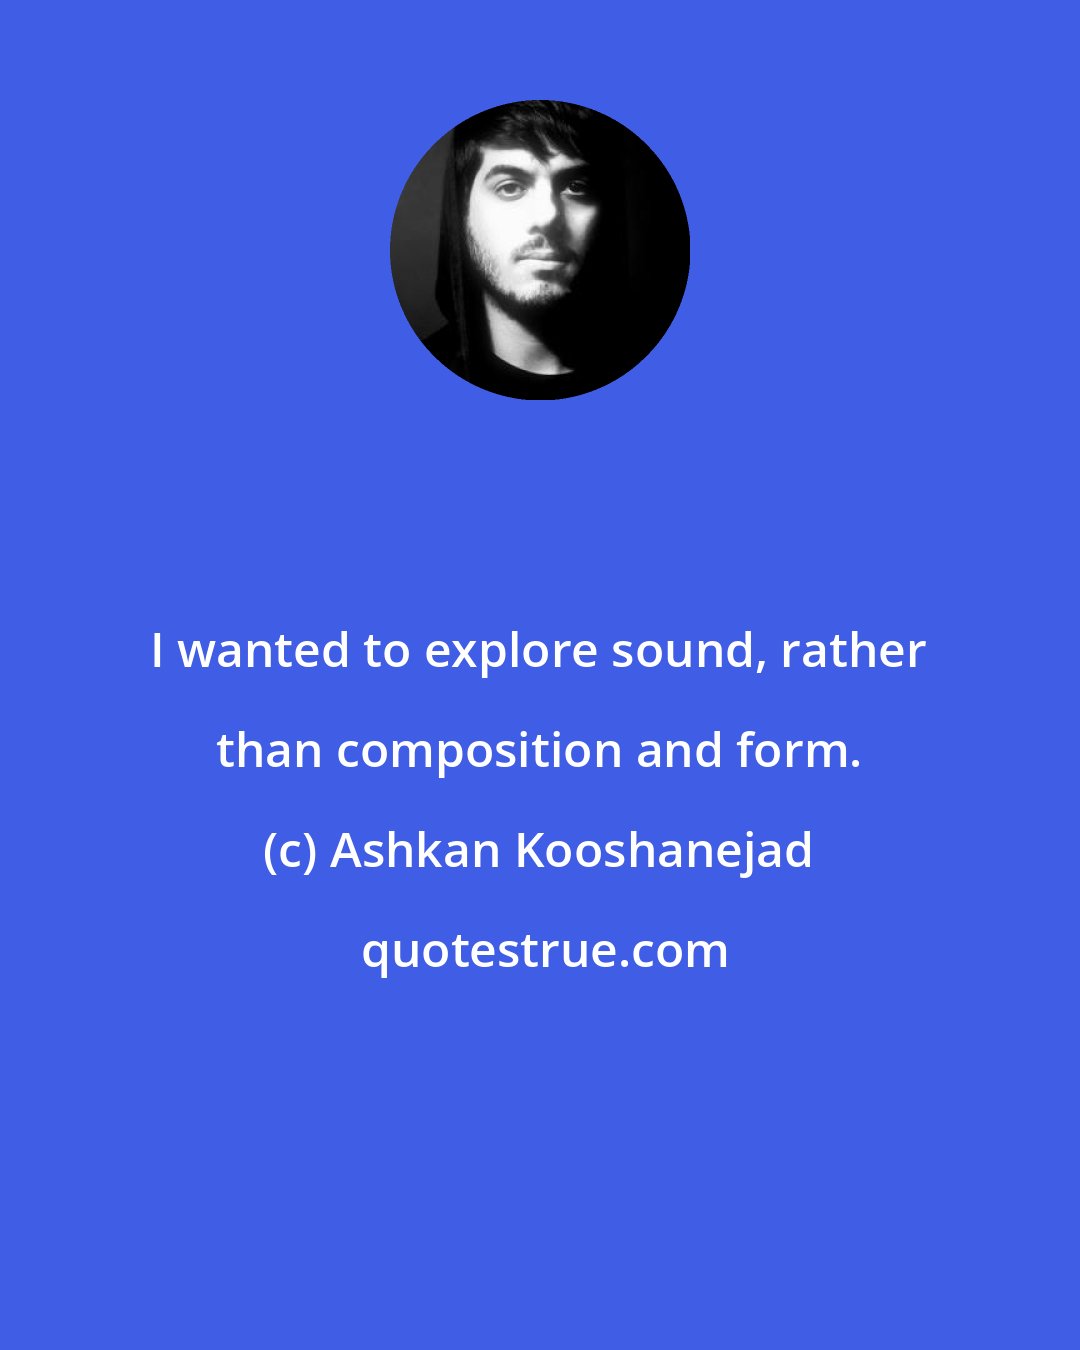 Ashkan Kooshanejad: I wanted to explore sound, rather than composition and form.